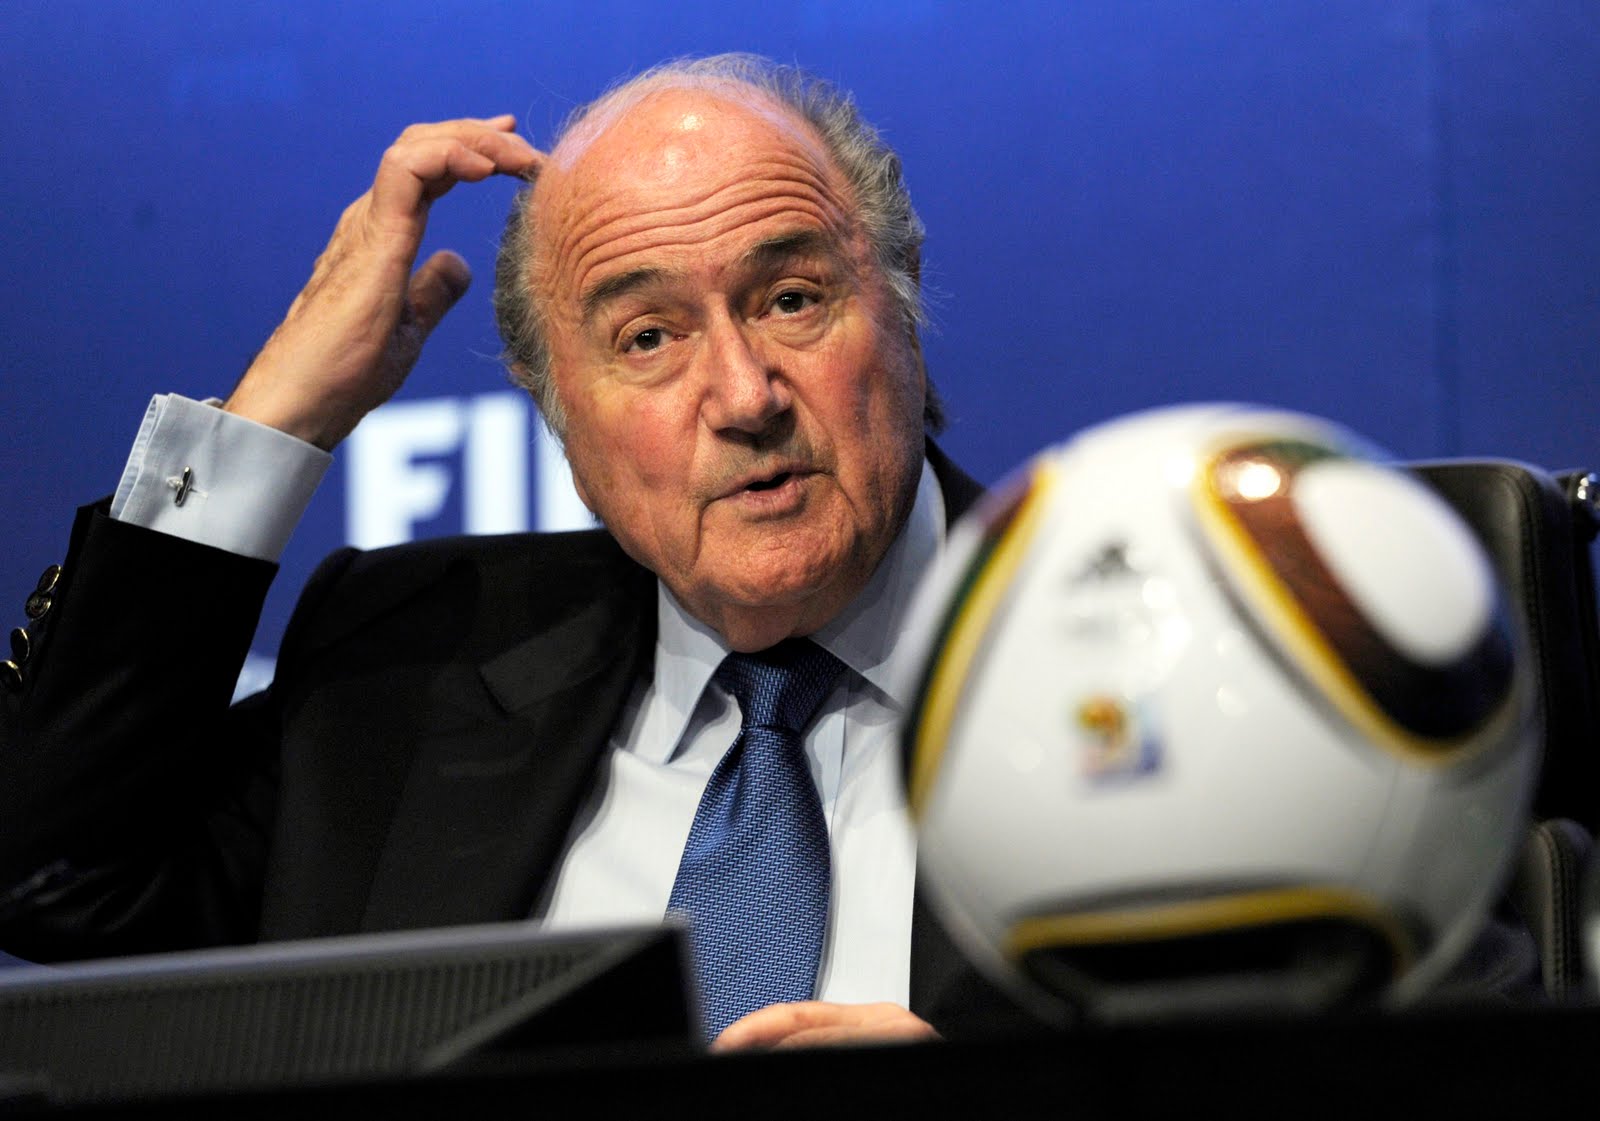 Sepp Blatter, FIFA President pictured at a news conference in an undated photo